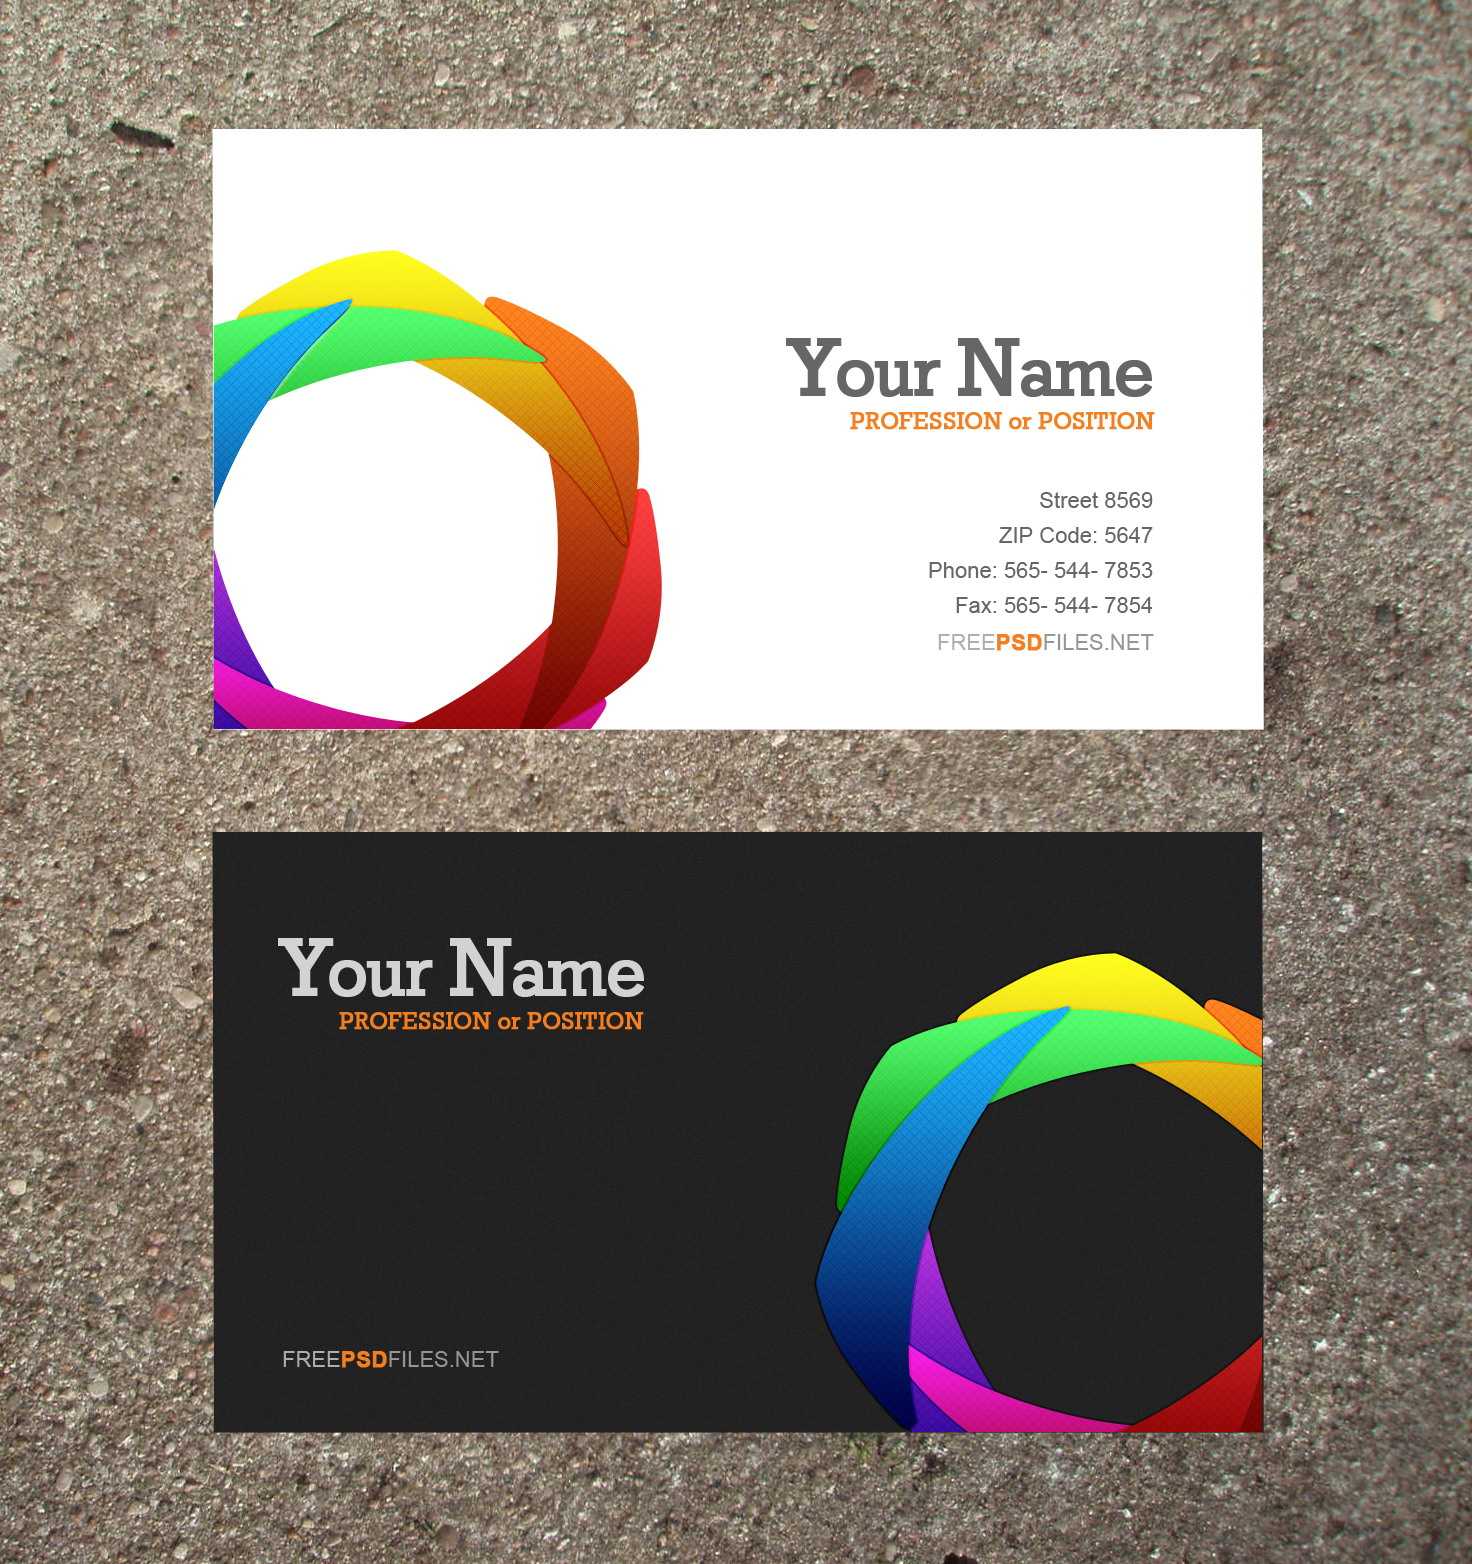 business card template psd business card templates free download